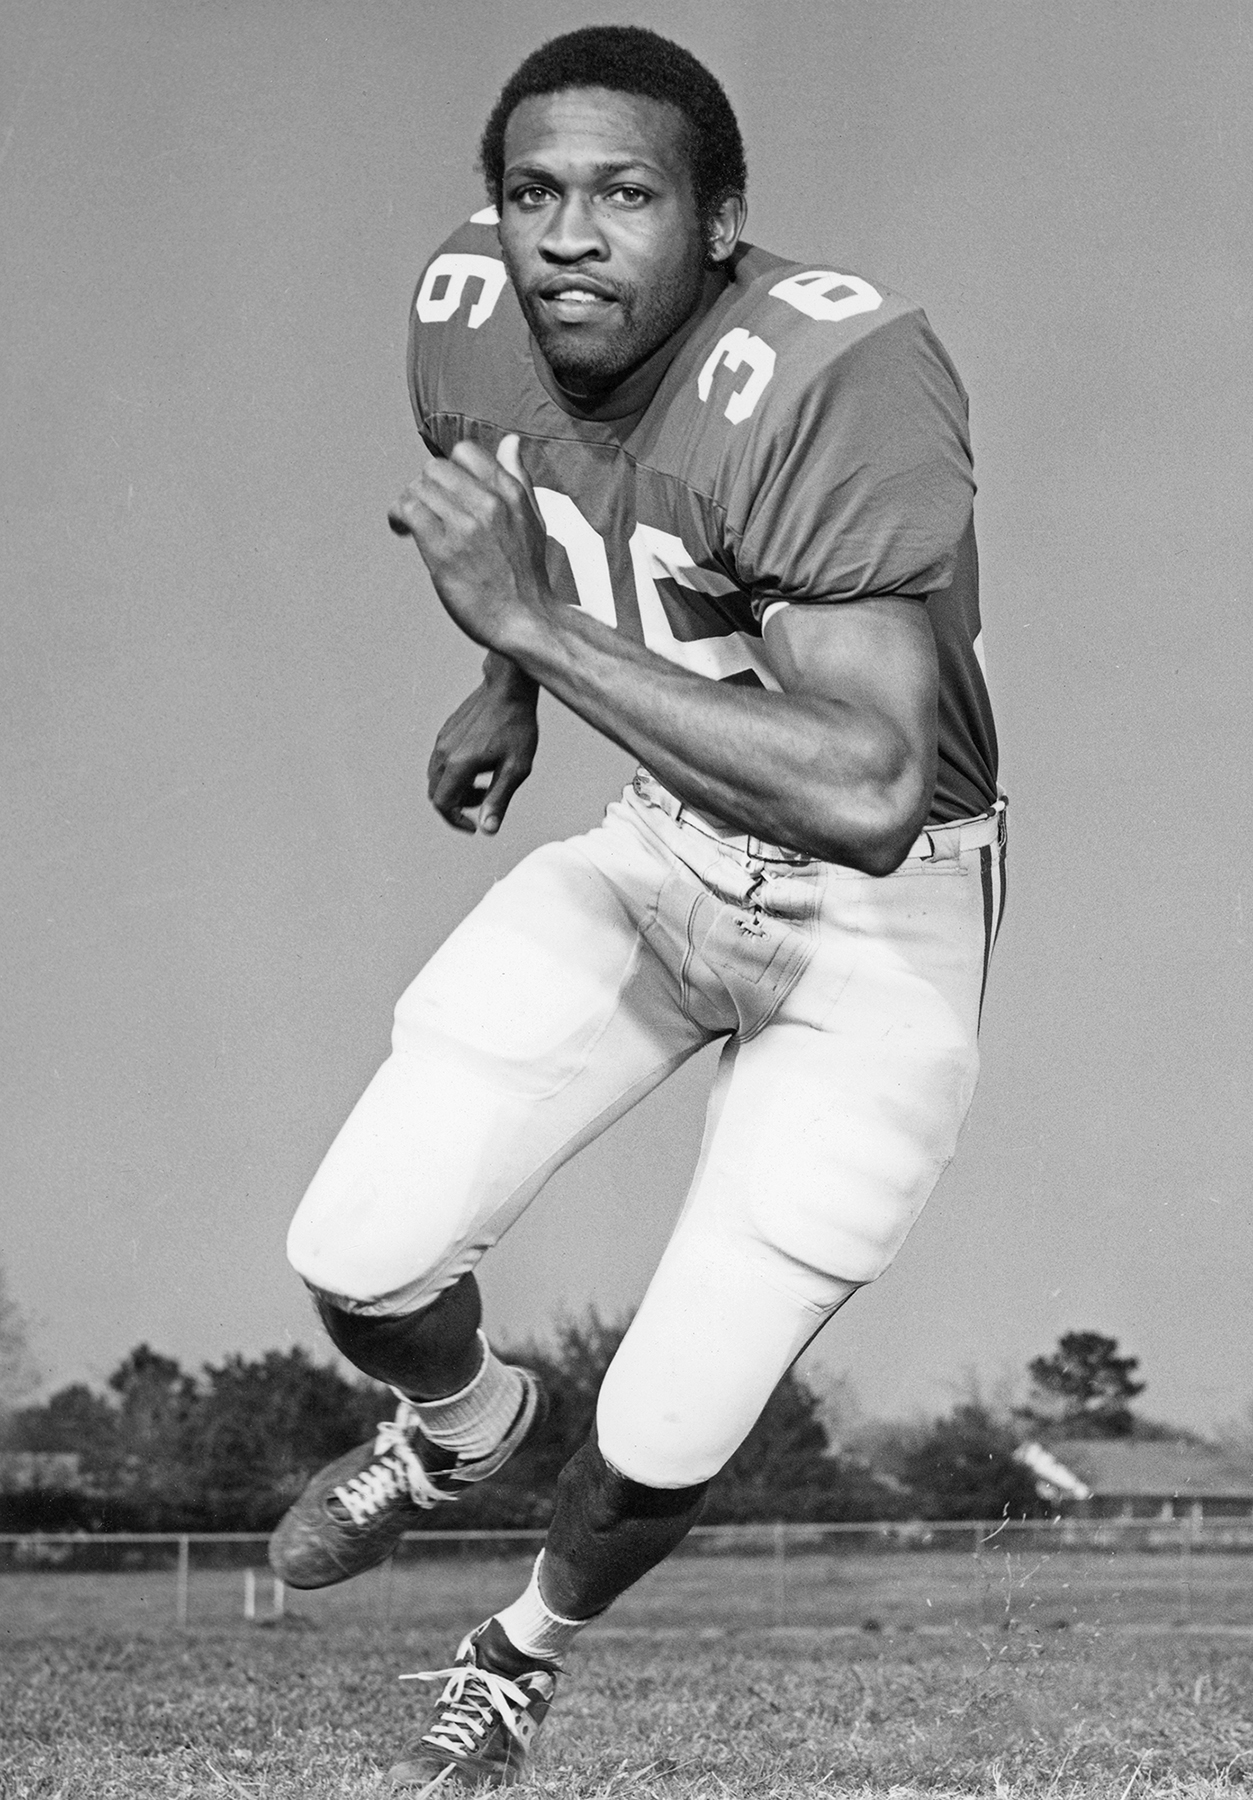 Black and white photo of a posed football player in football jersey.